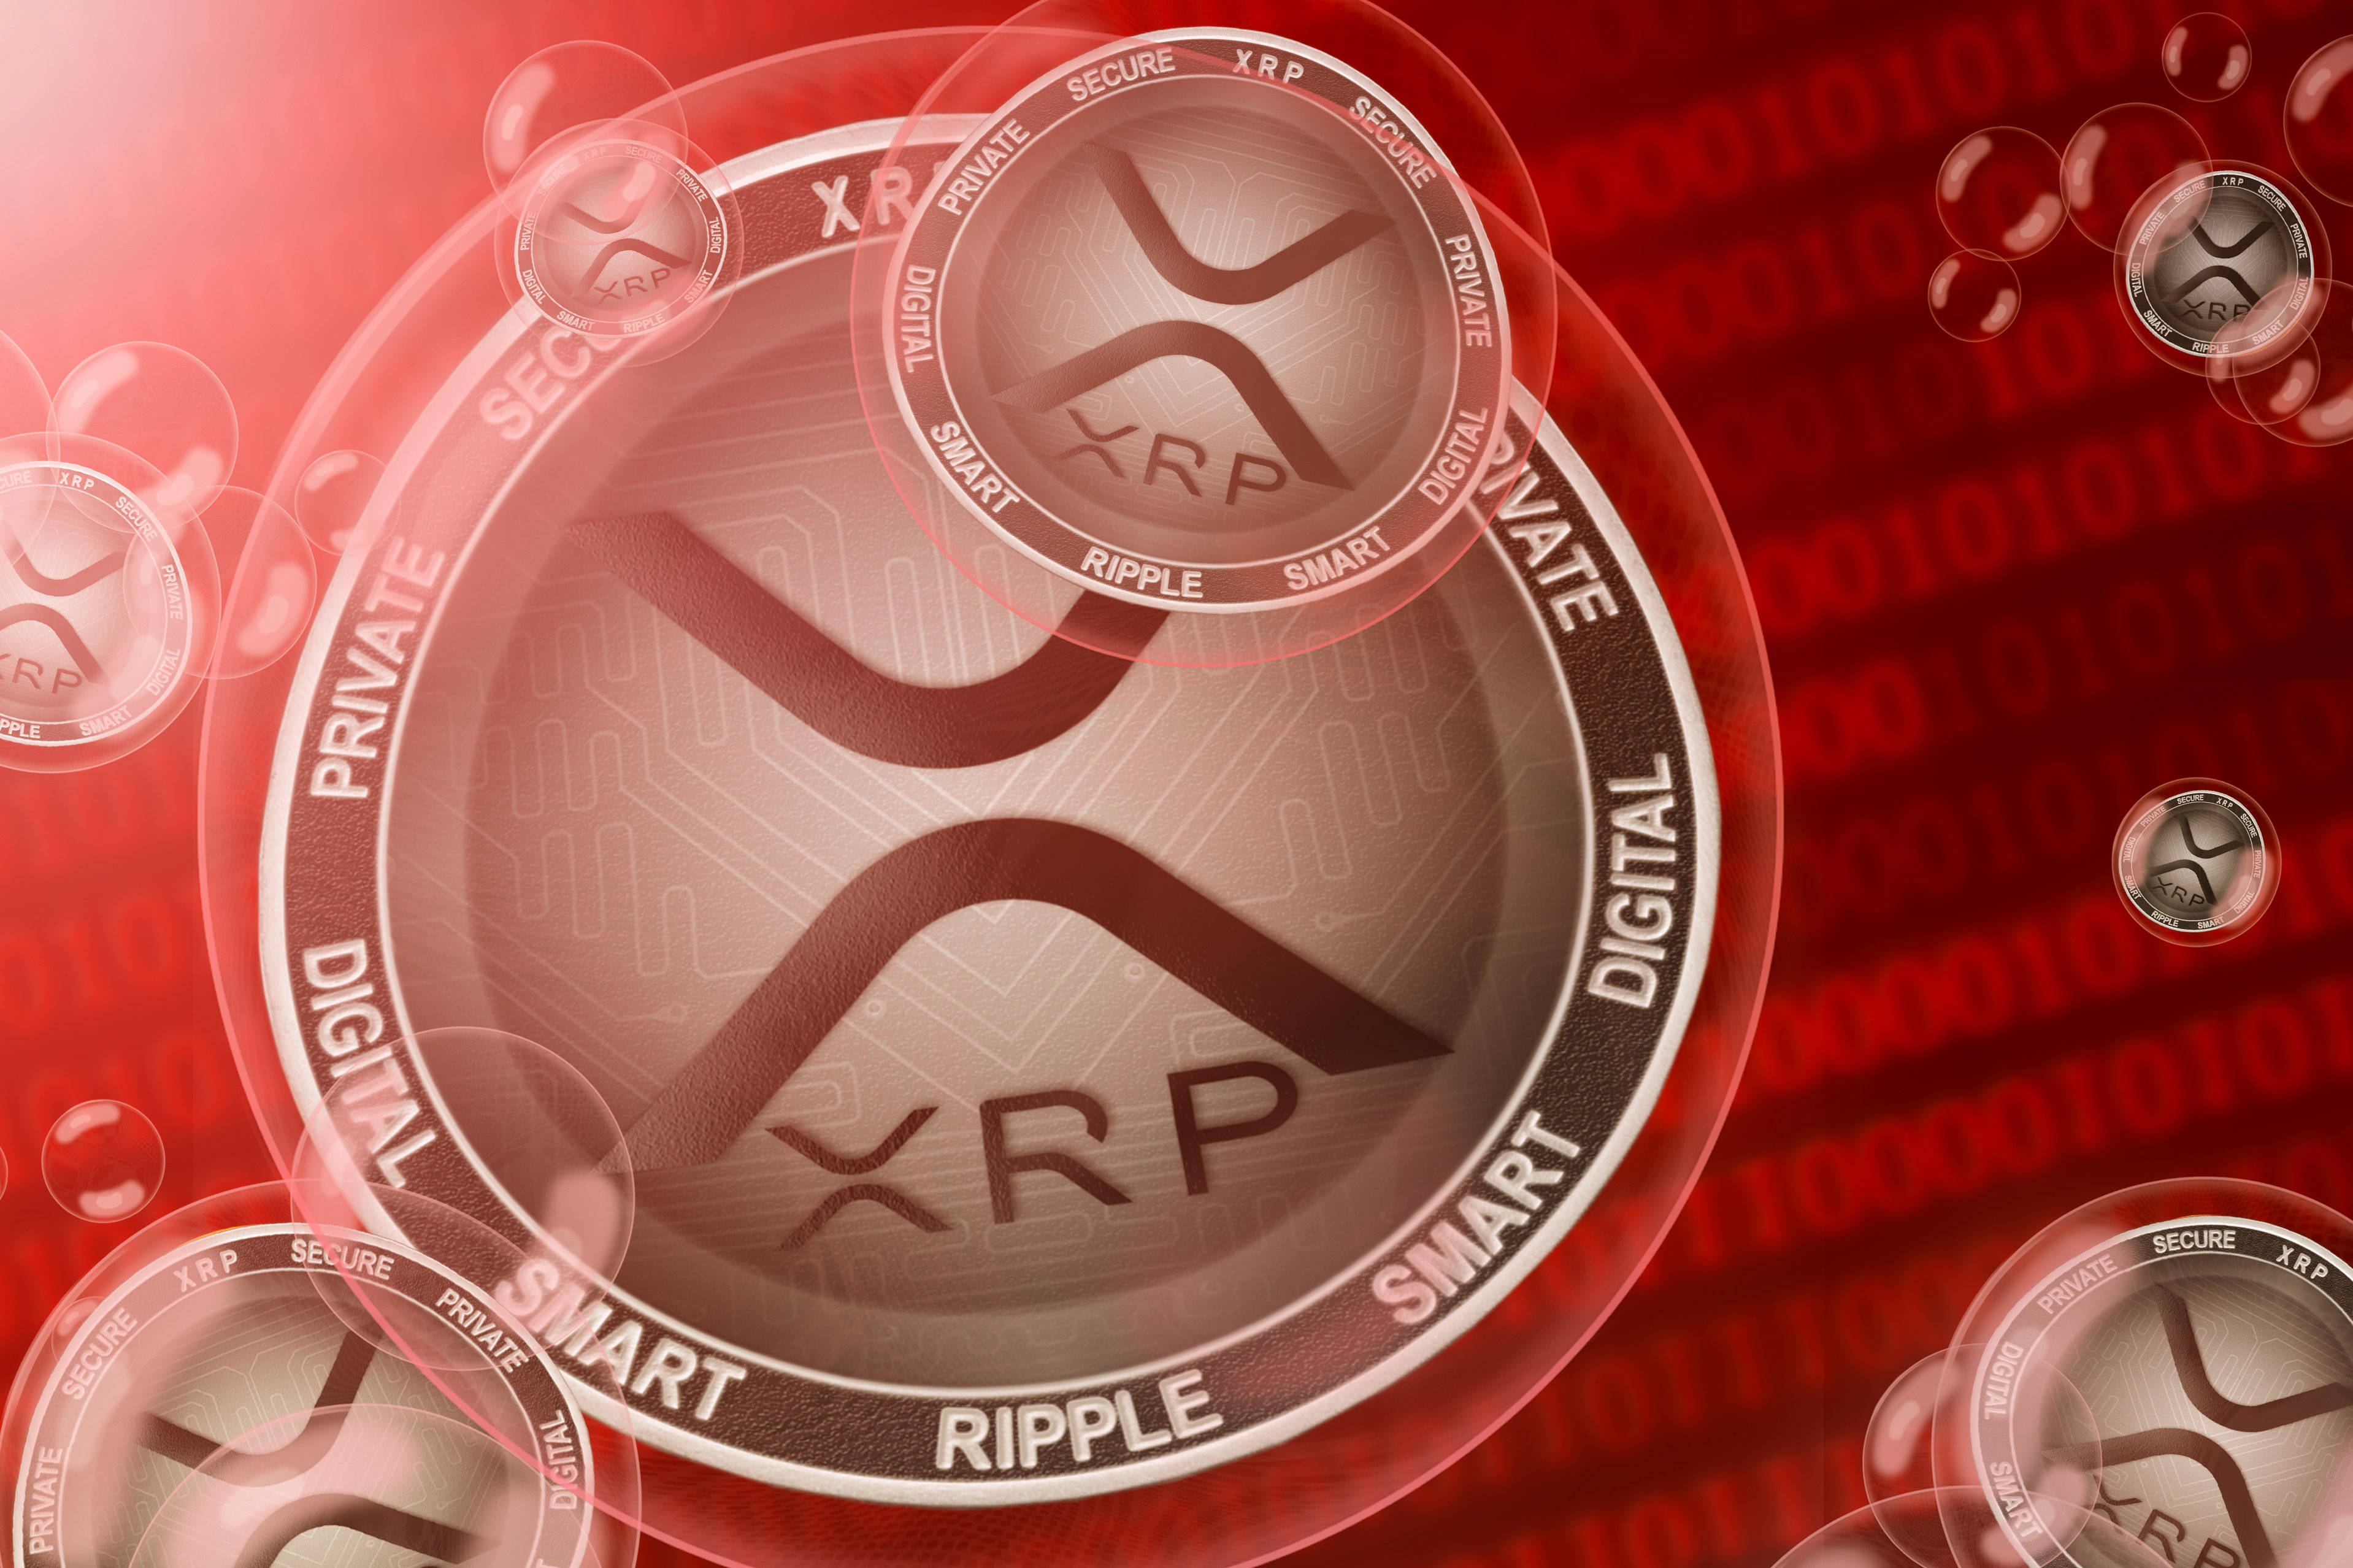 445 Million XRP Moved by Ripple and Anon Whale as XRP Price Expected to Spike in April 2022